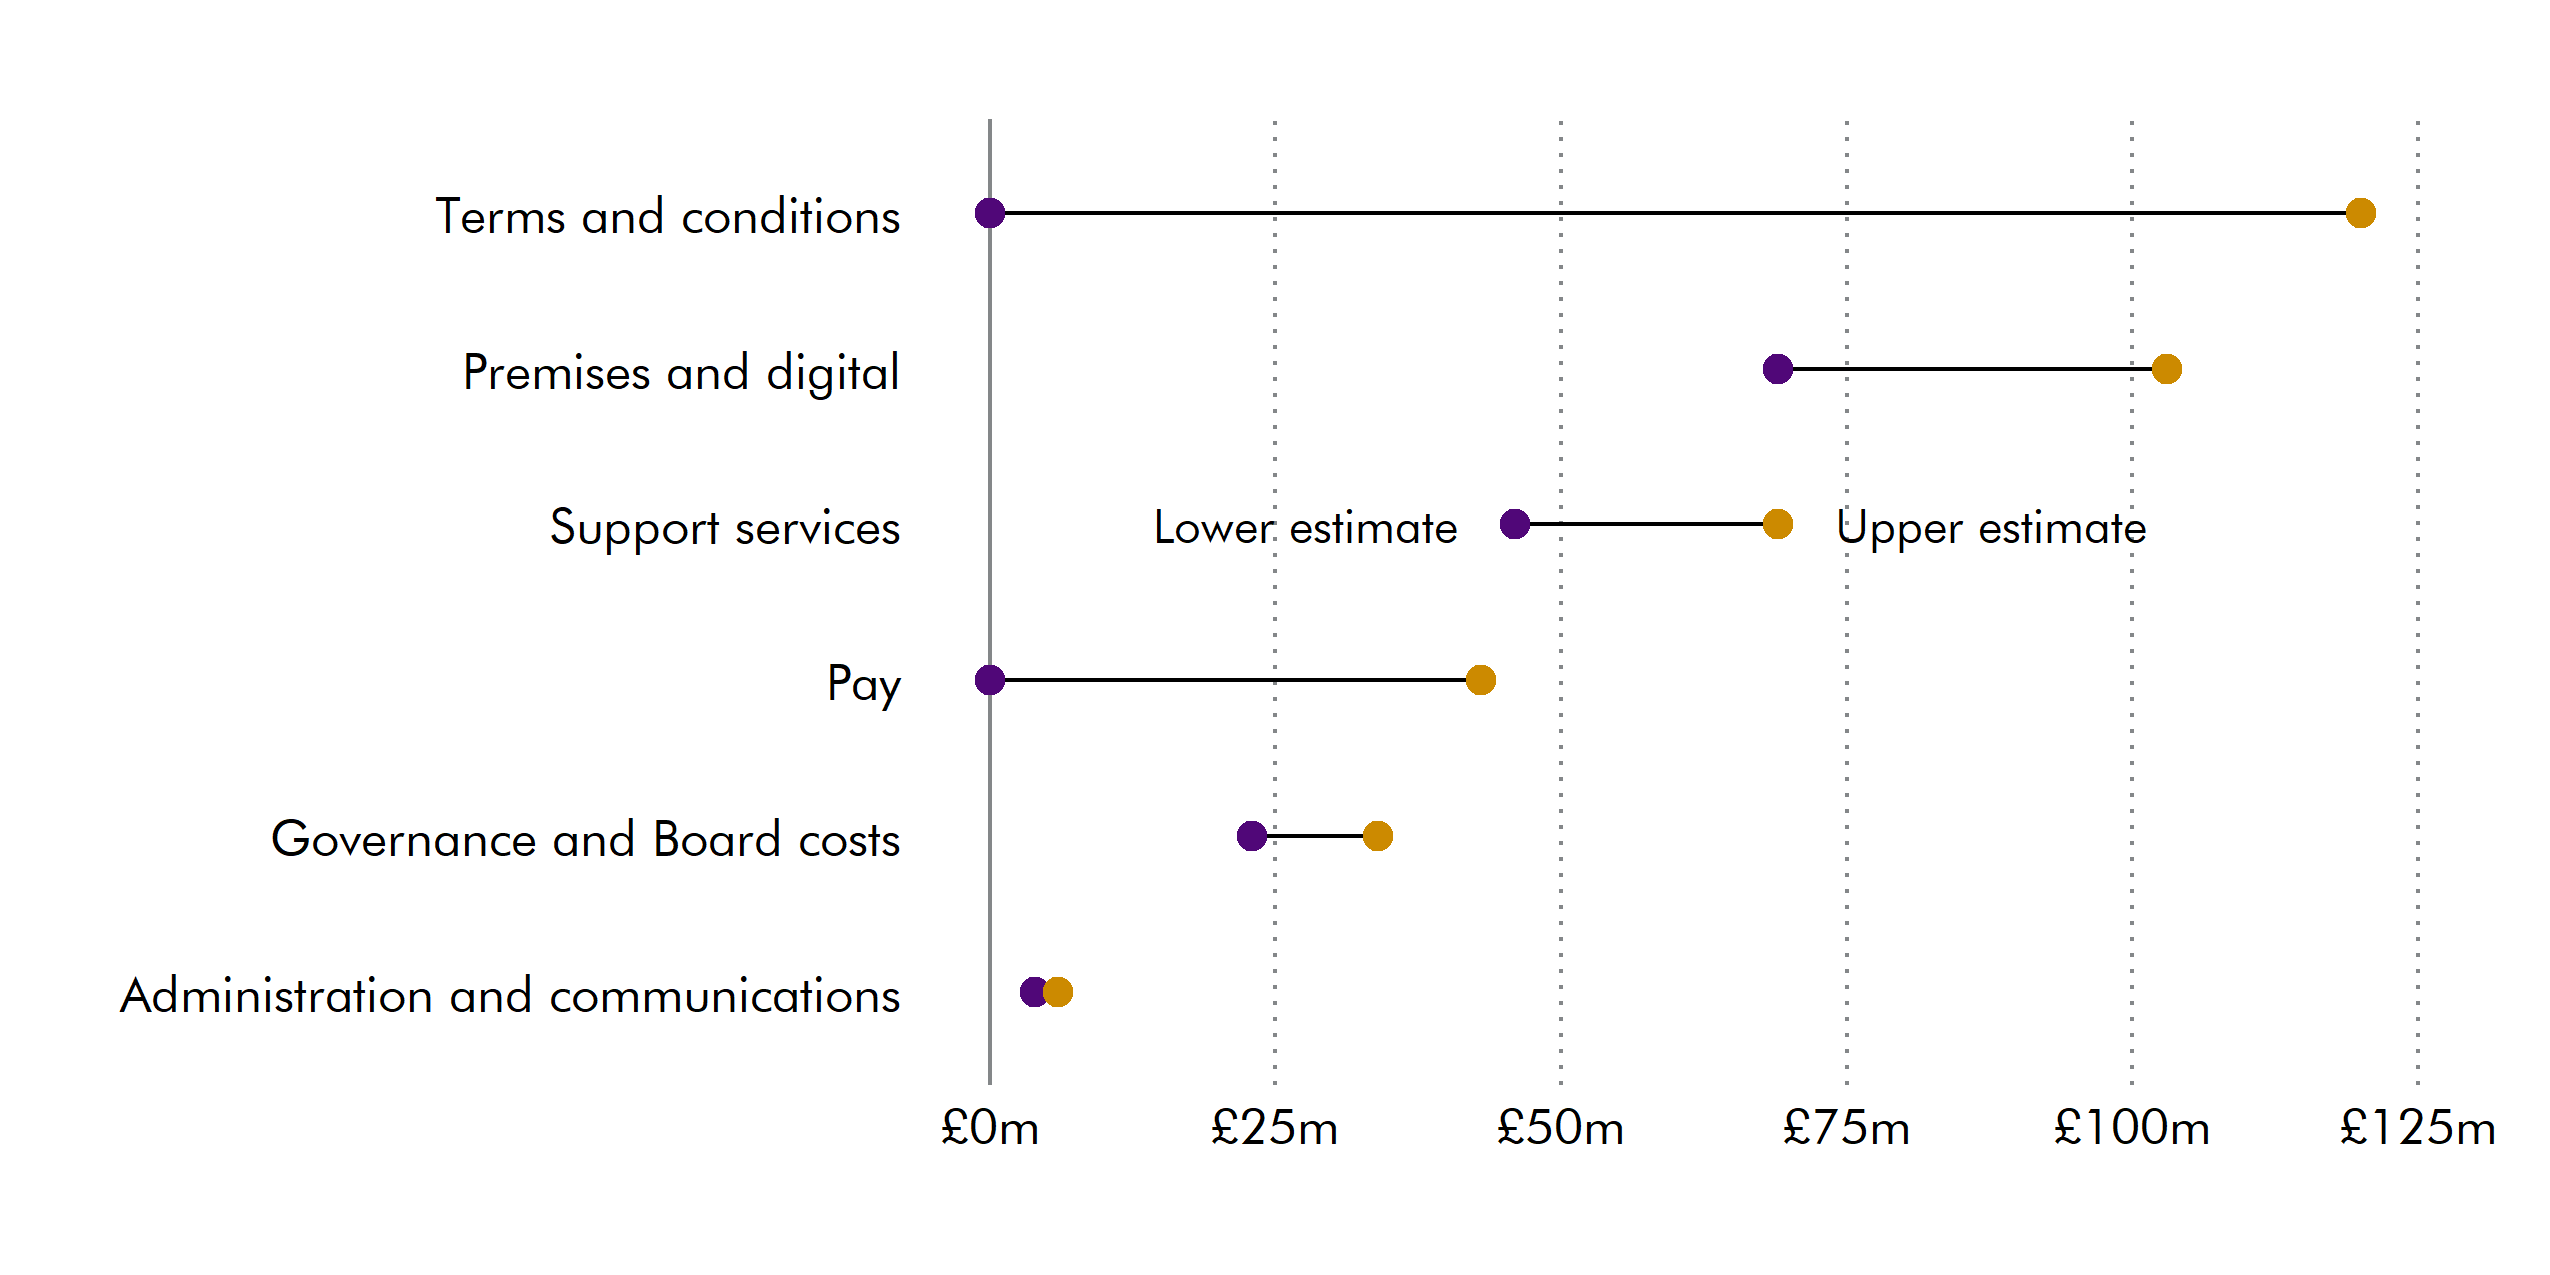 Chart showing the range of additional care board costs in 2026-27, for terms and conditions, premises and digital, support services, pay, governance and board costs, and administration and communications.